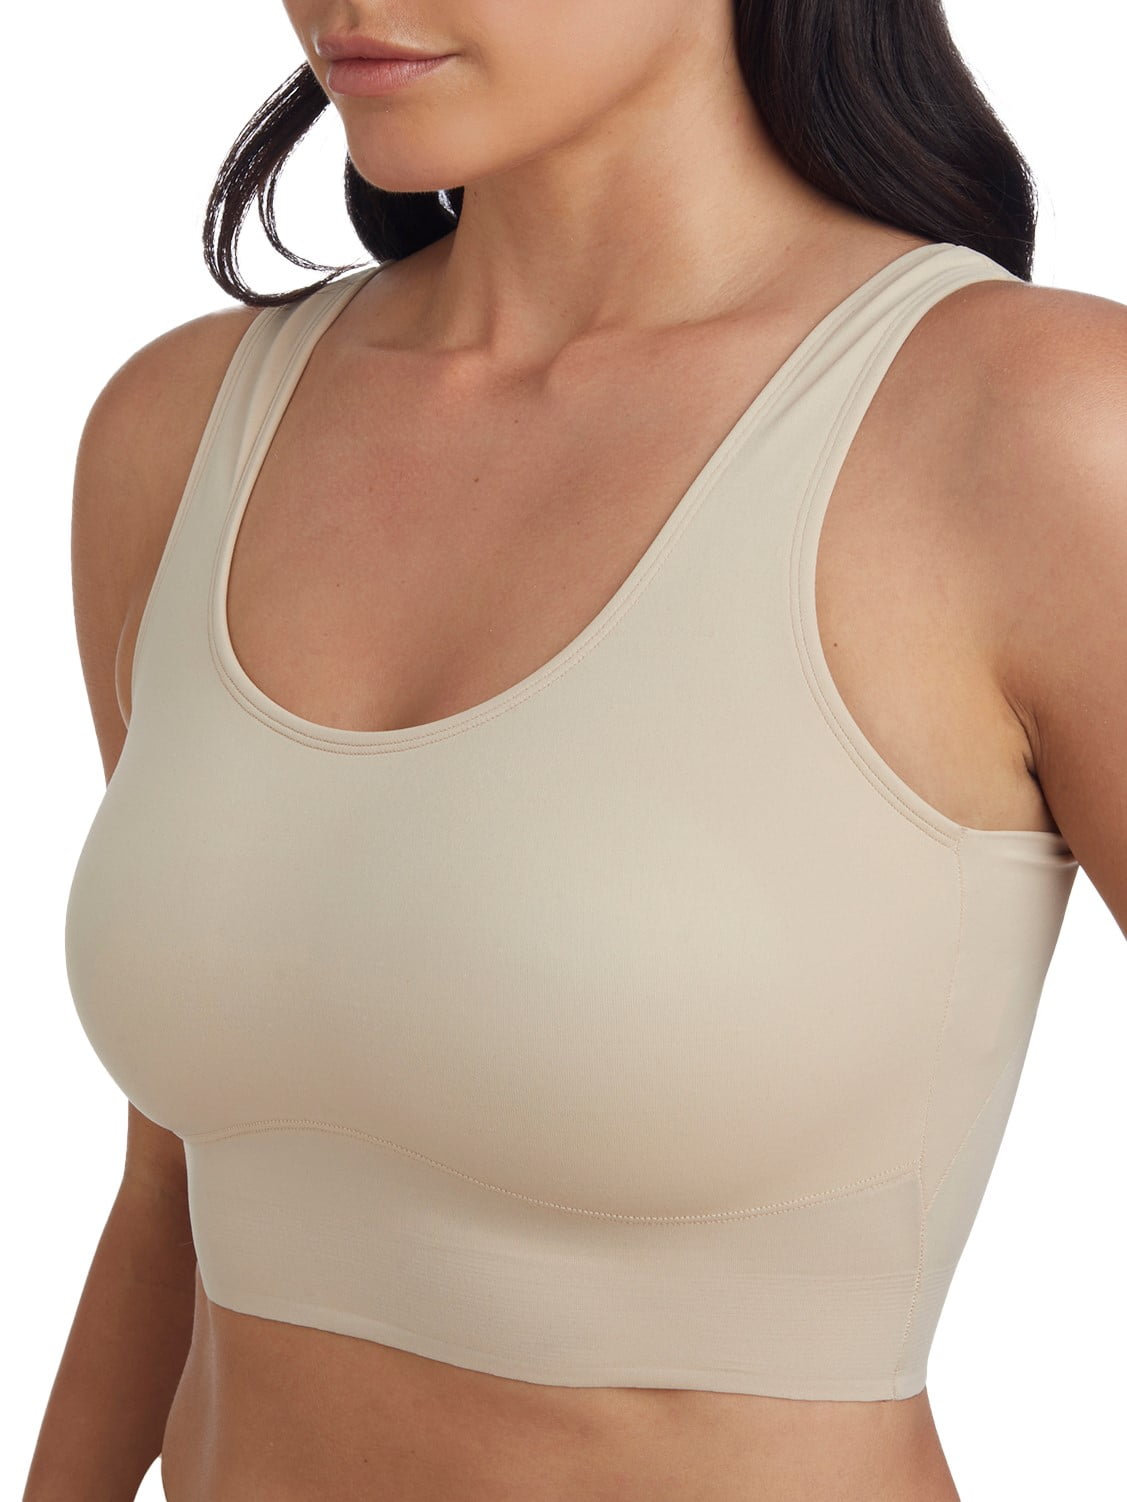 SLIMBELLE Women's Cami Shaper Tummy Control Padded Seamless Compression Tank  Top 